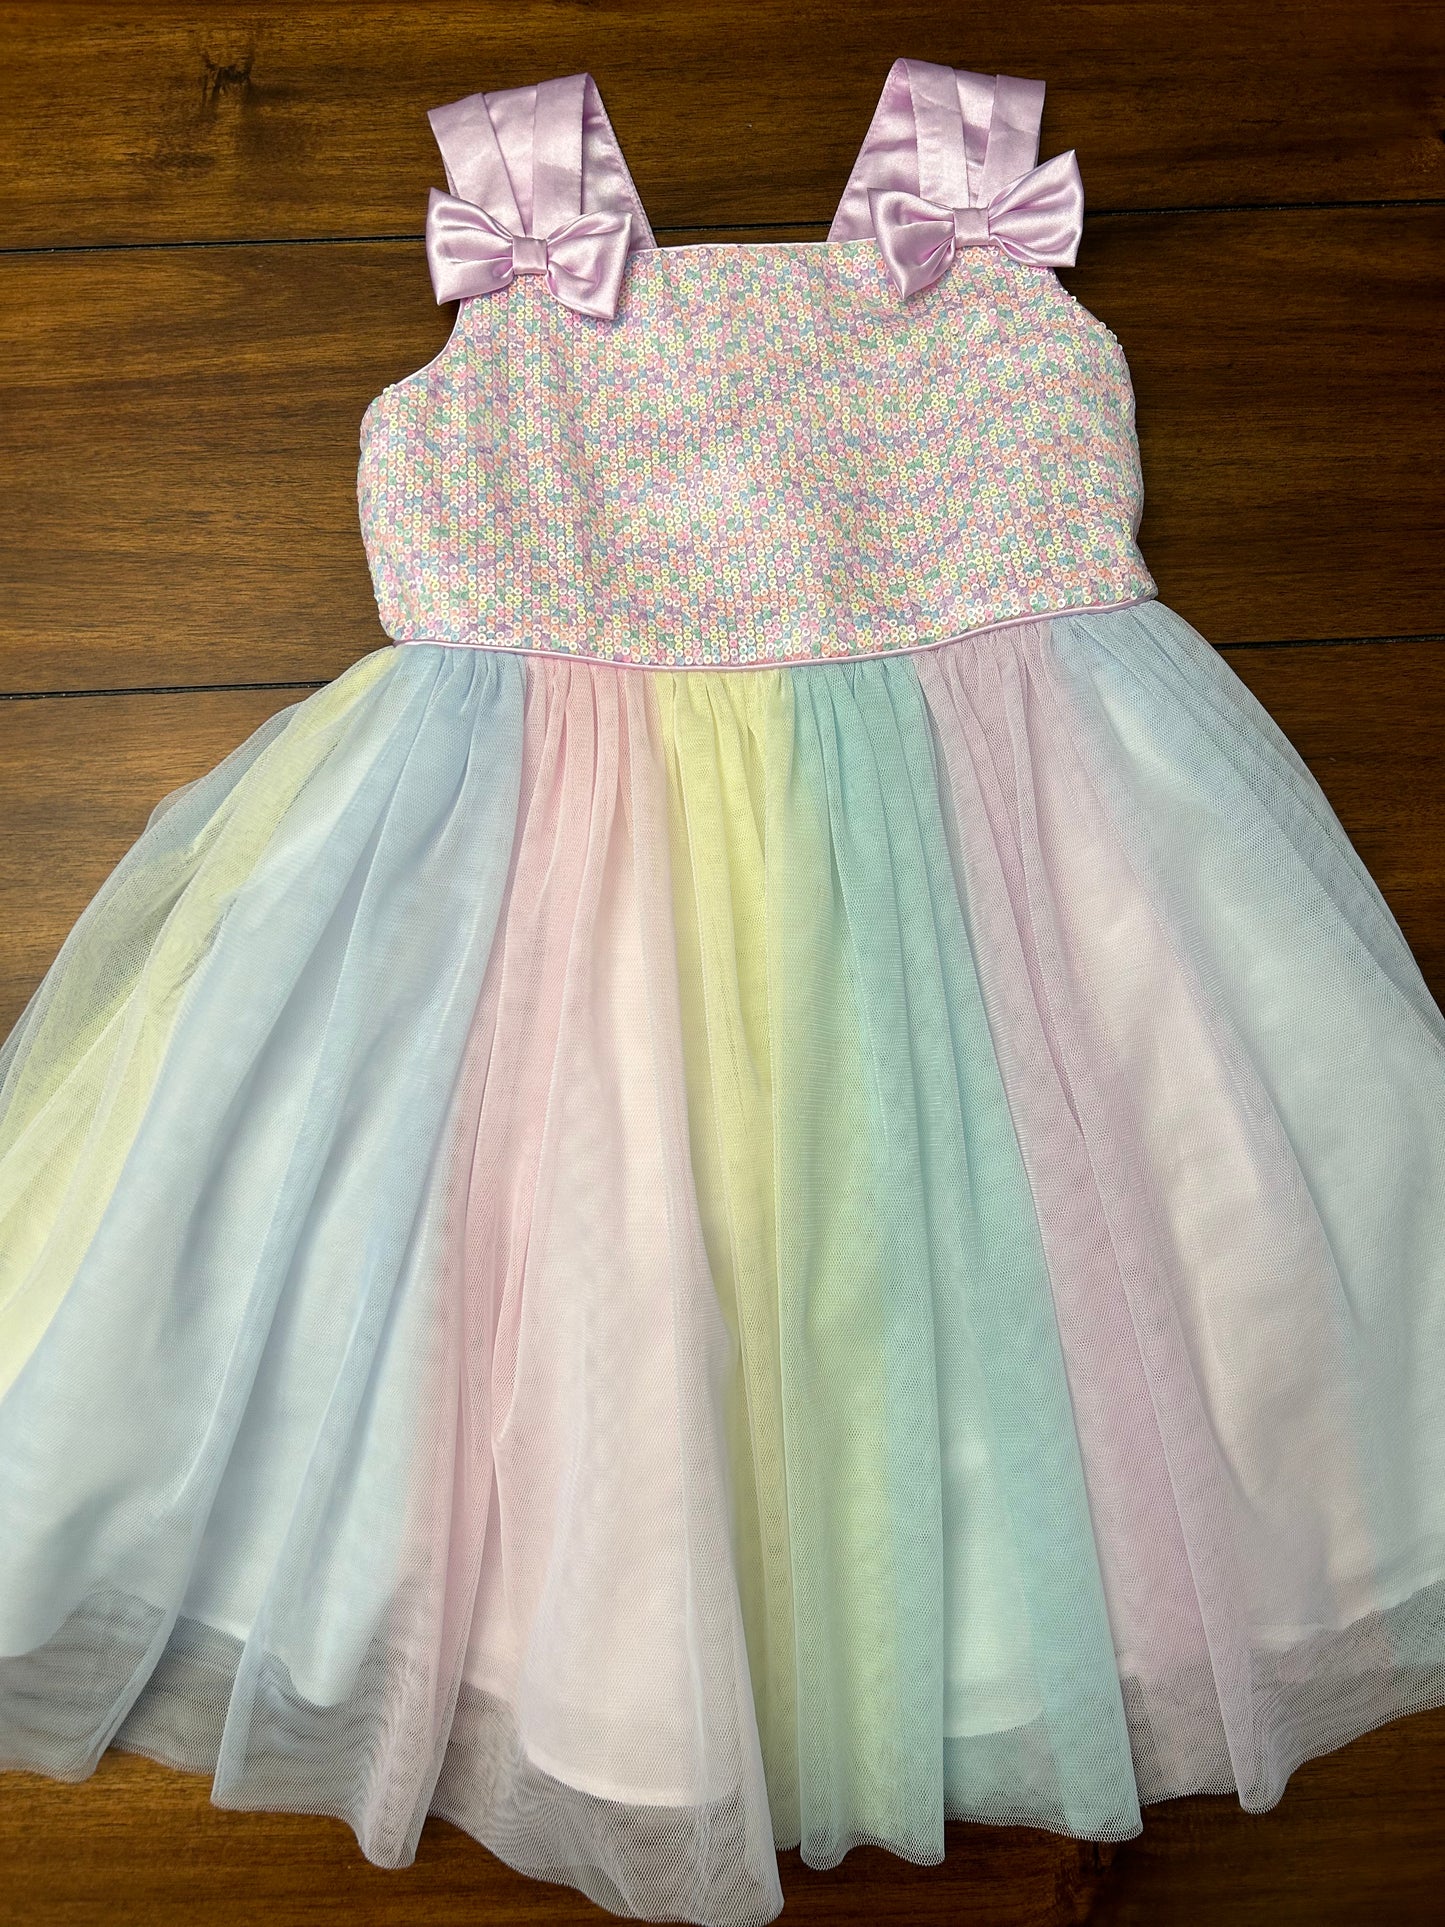 Jona Michelle	Girls Pastel Sleeveless Special Occasion Tulle Dress Size 5  PPU 45040